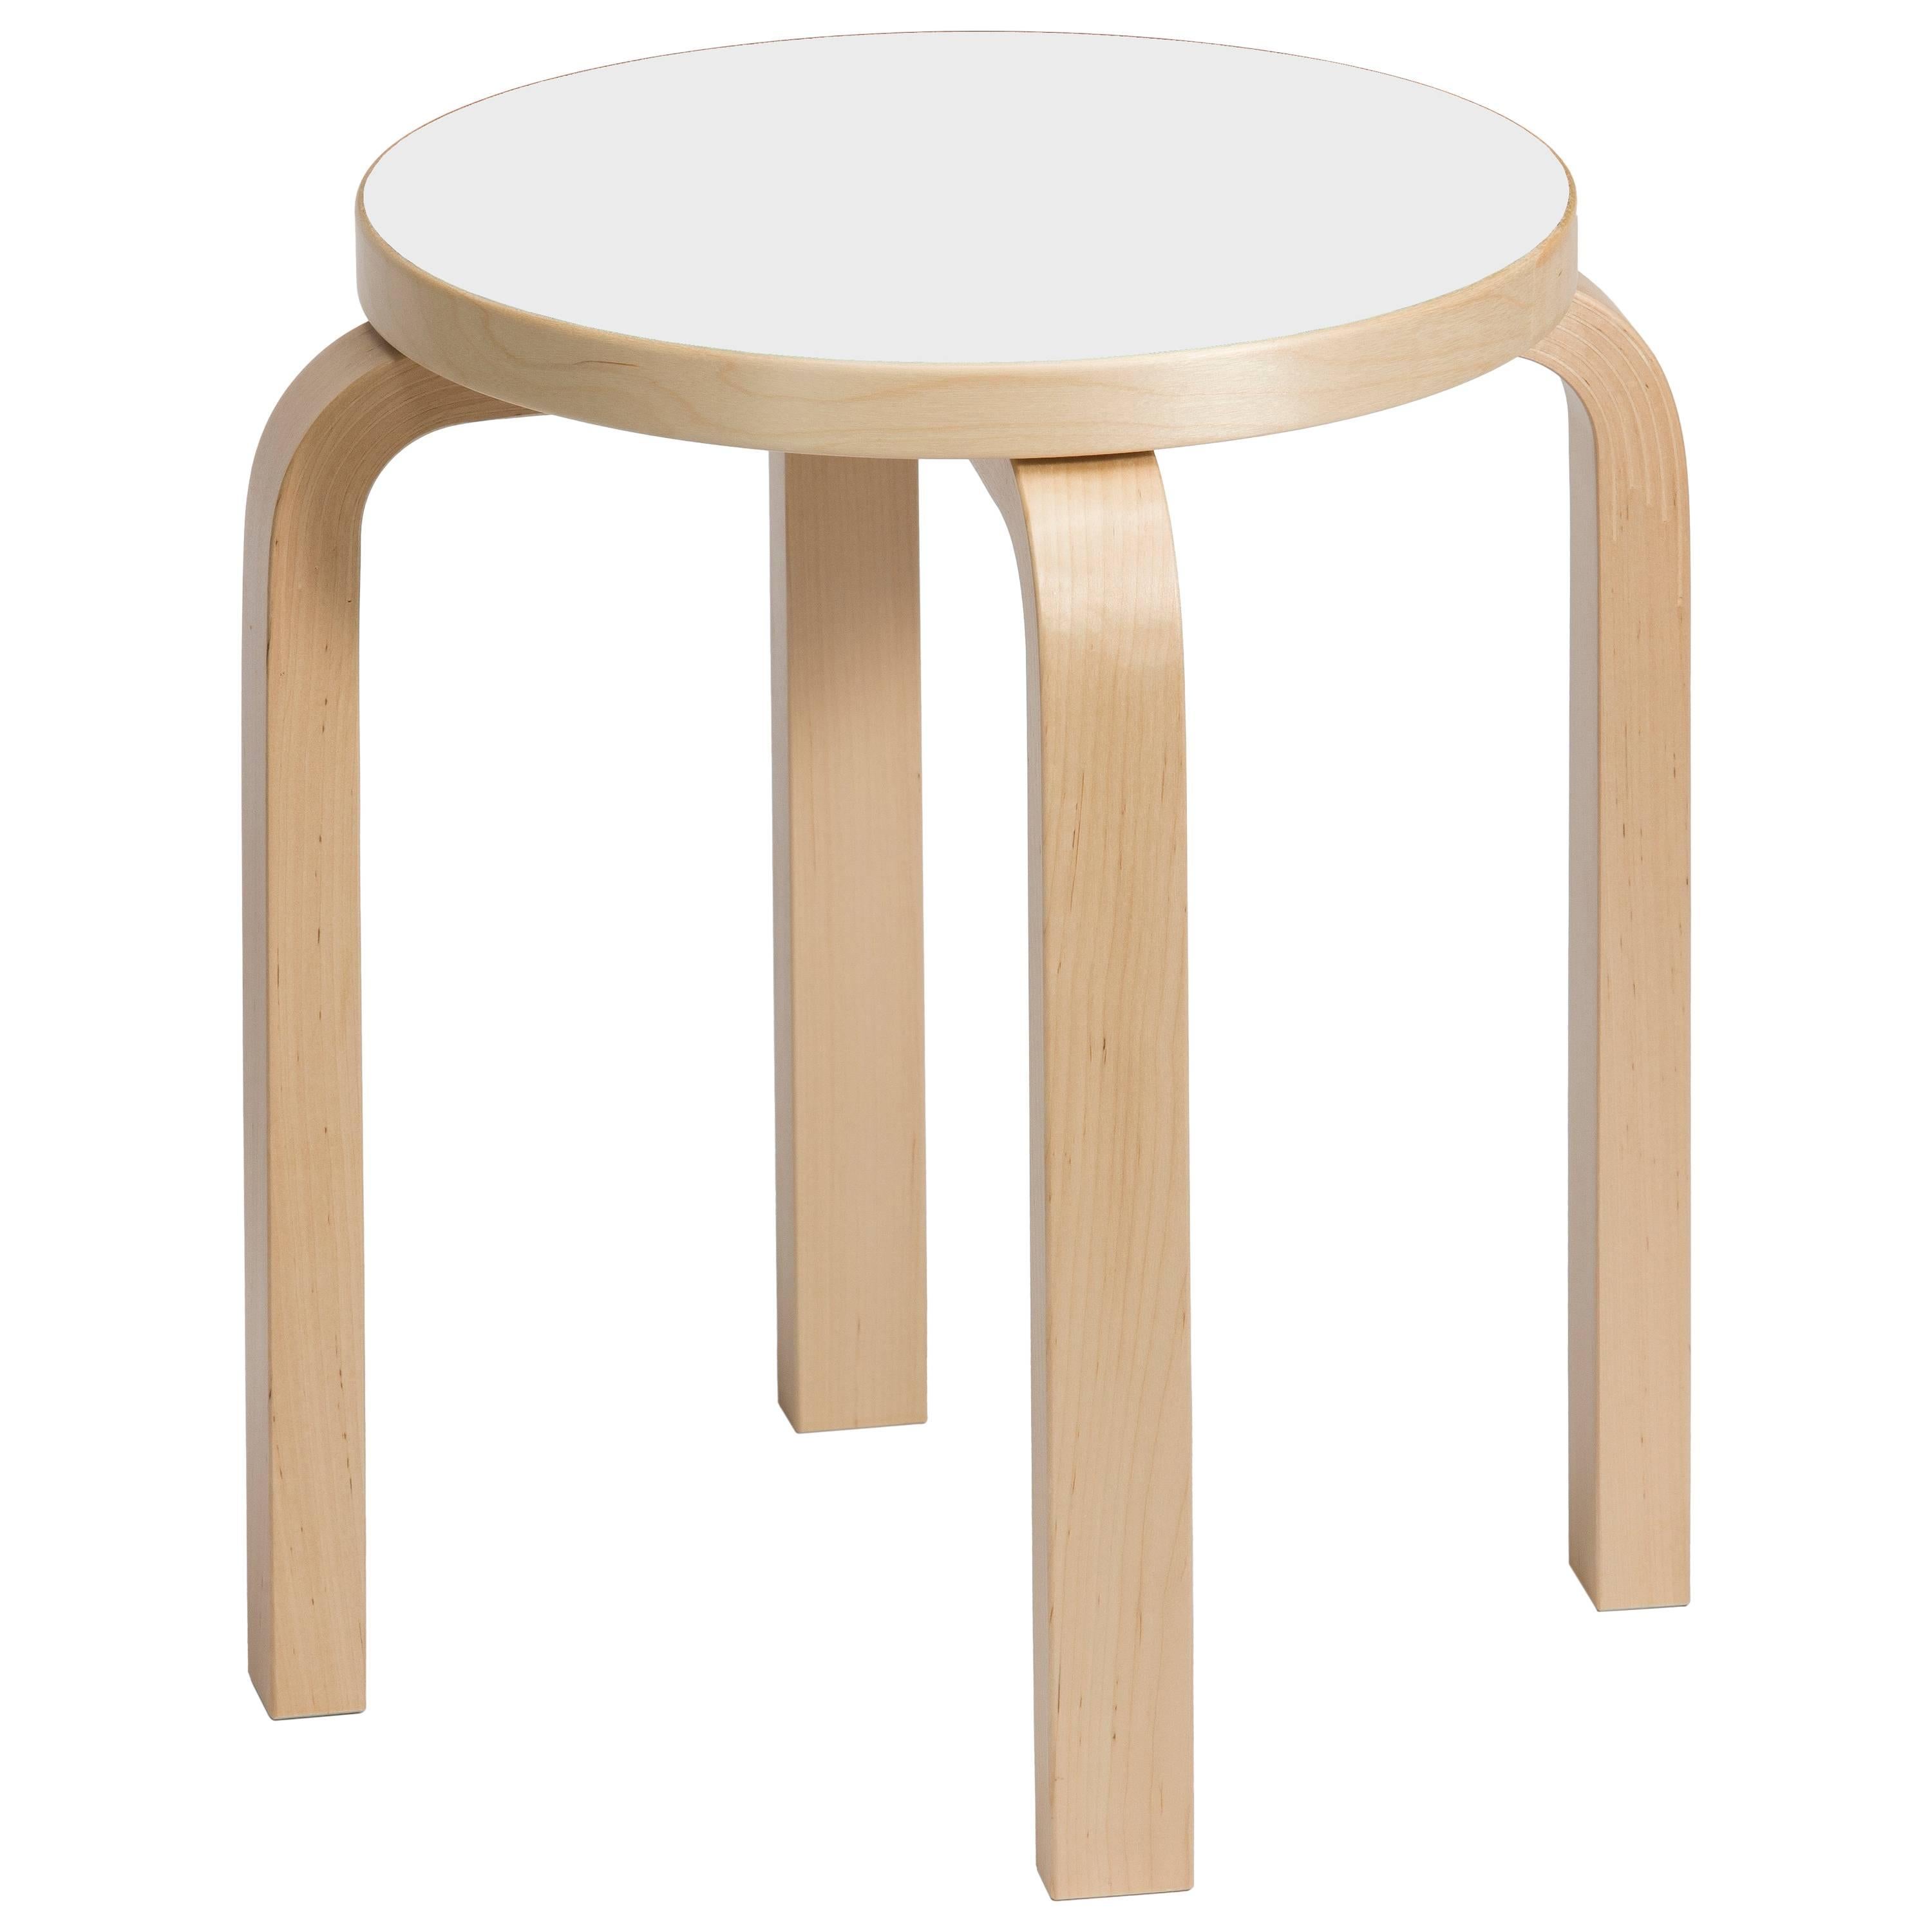 Authentic Stool E60 in Birch with White Laminate Seat by Alvar Aalto & Artek For Sale